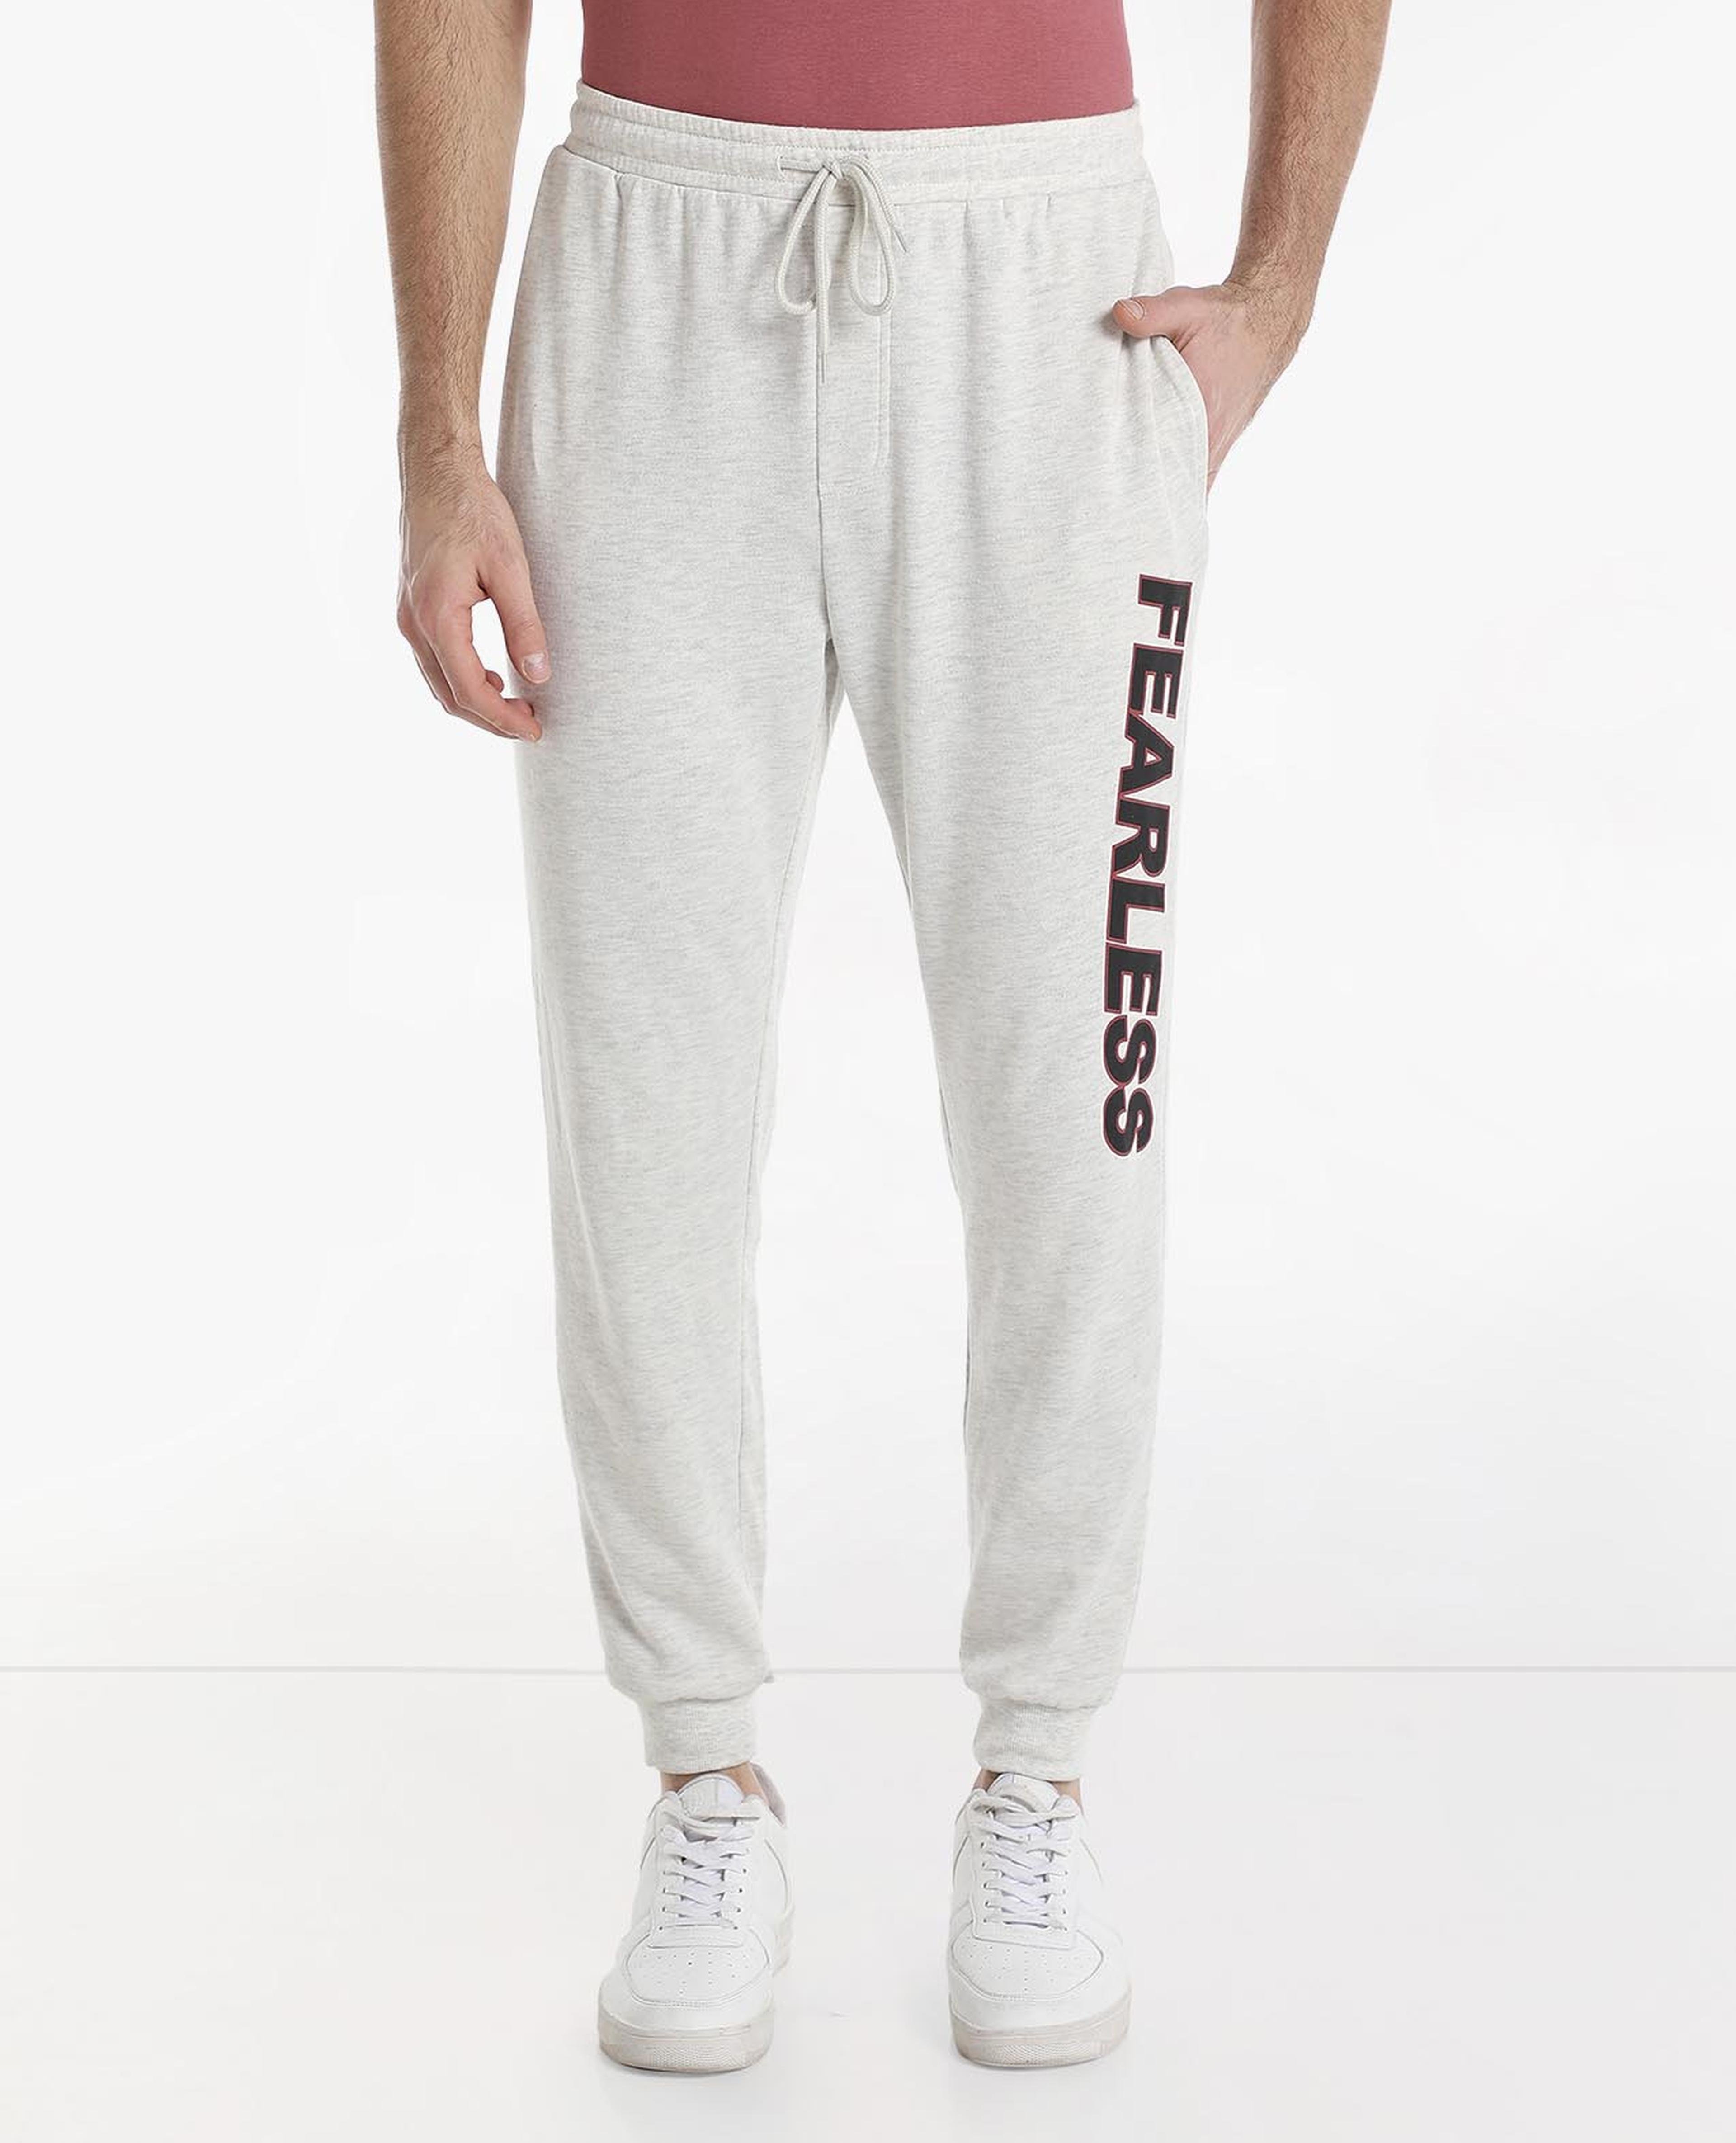 Solid Casual Typography Printed Joggers